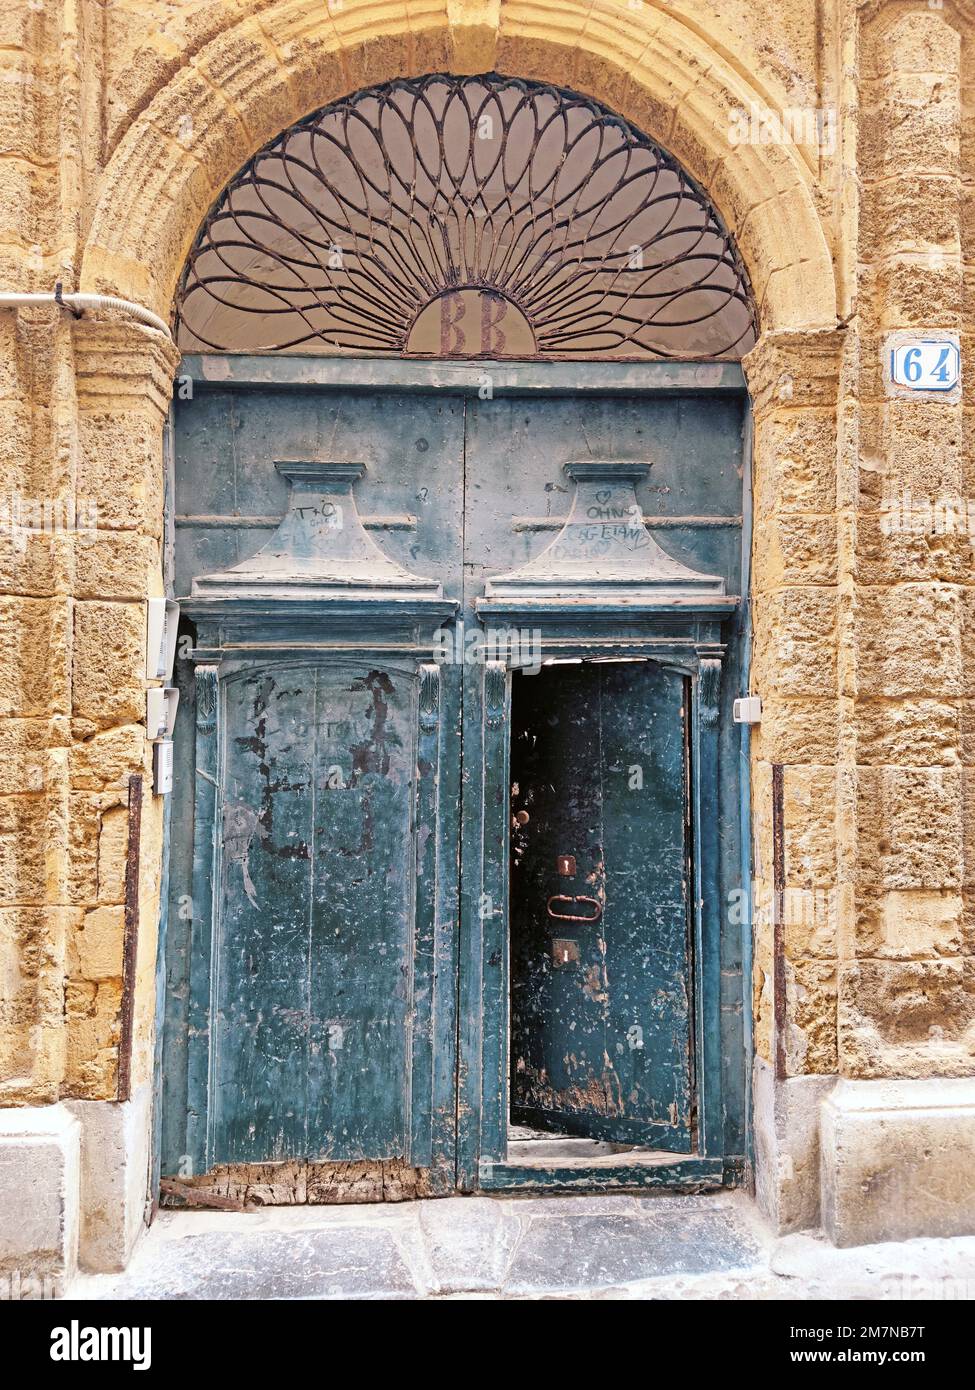 Gate of a double-leaf wooden door, old town house in the town of Cefalu, Sicily Stock Photo